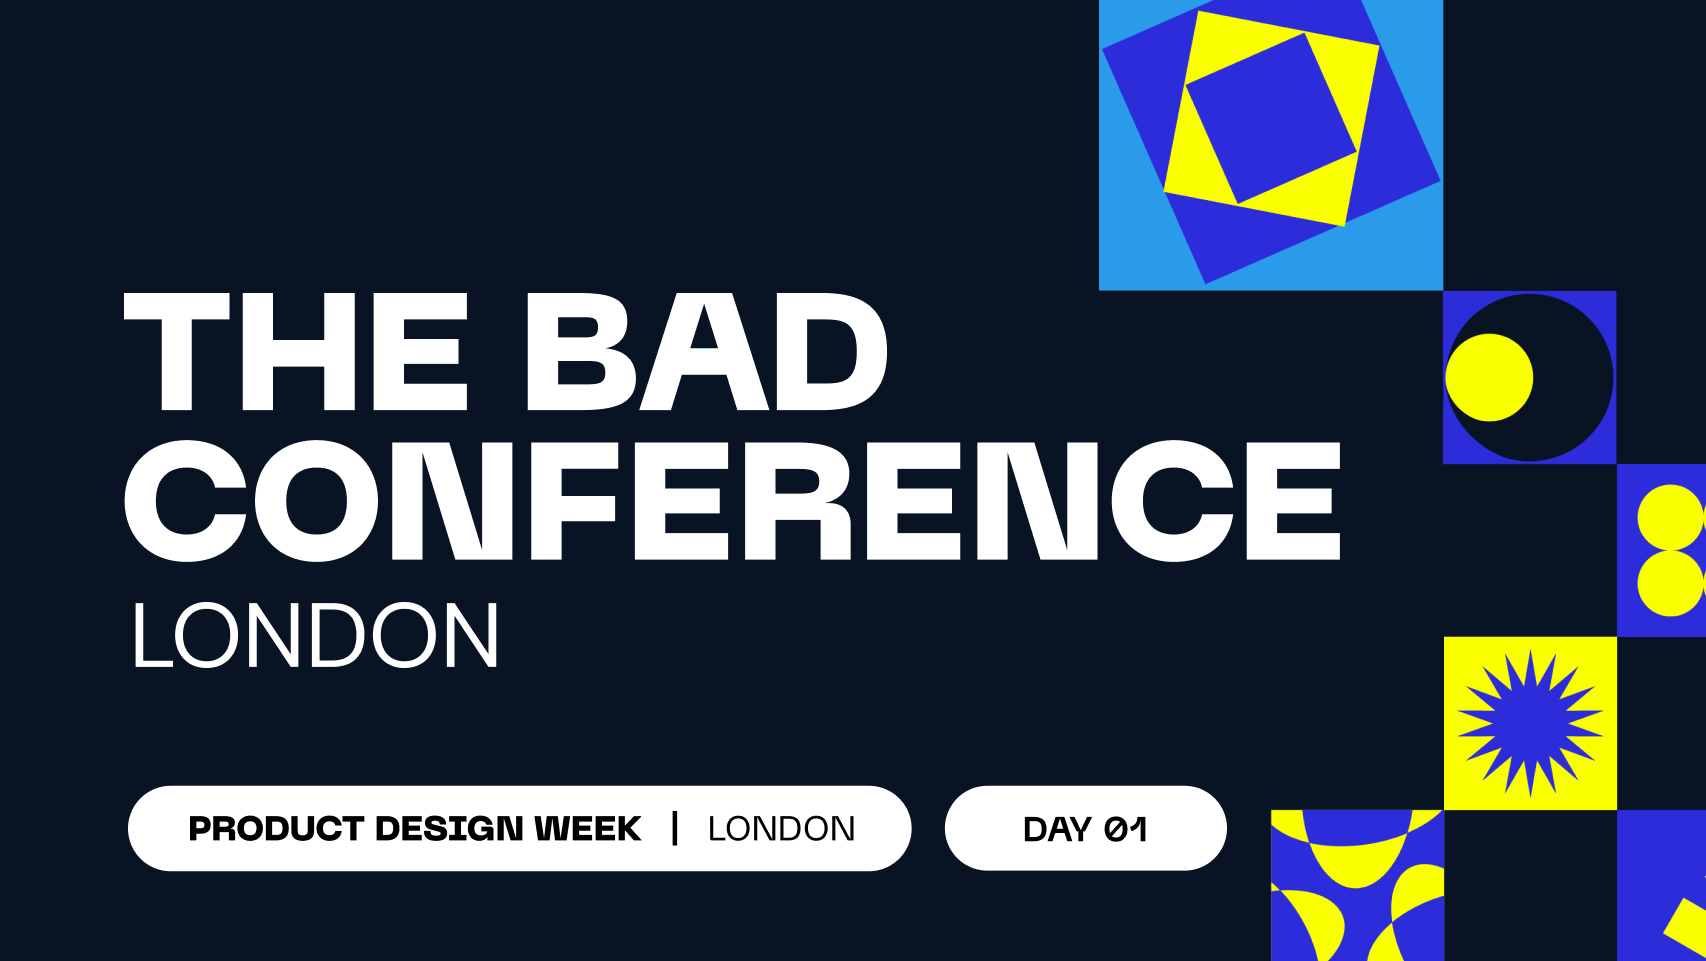 The Bad Conference London